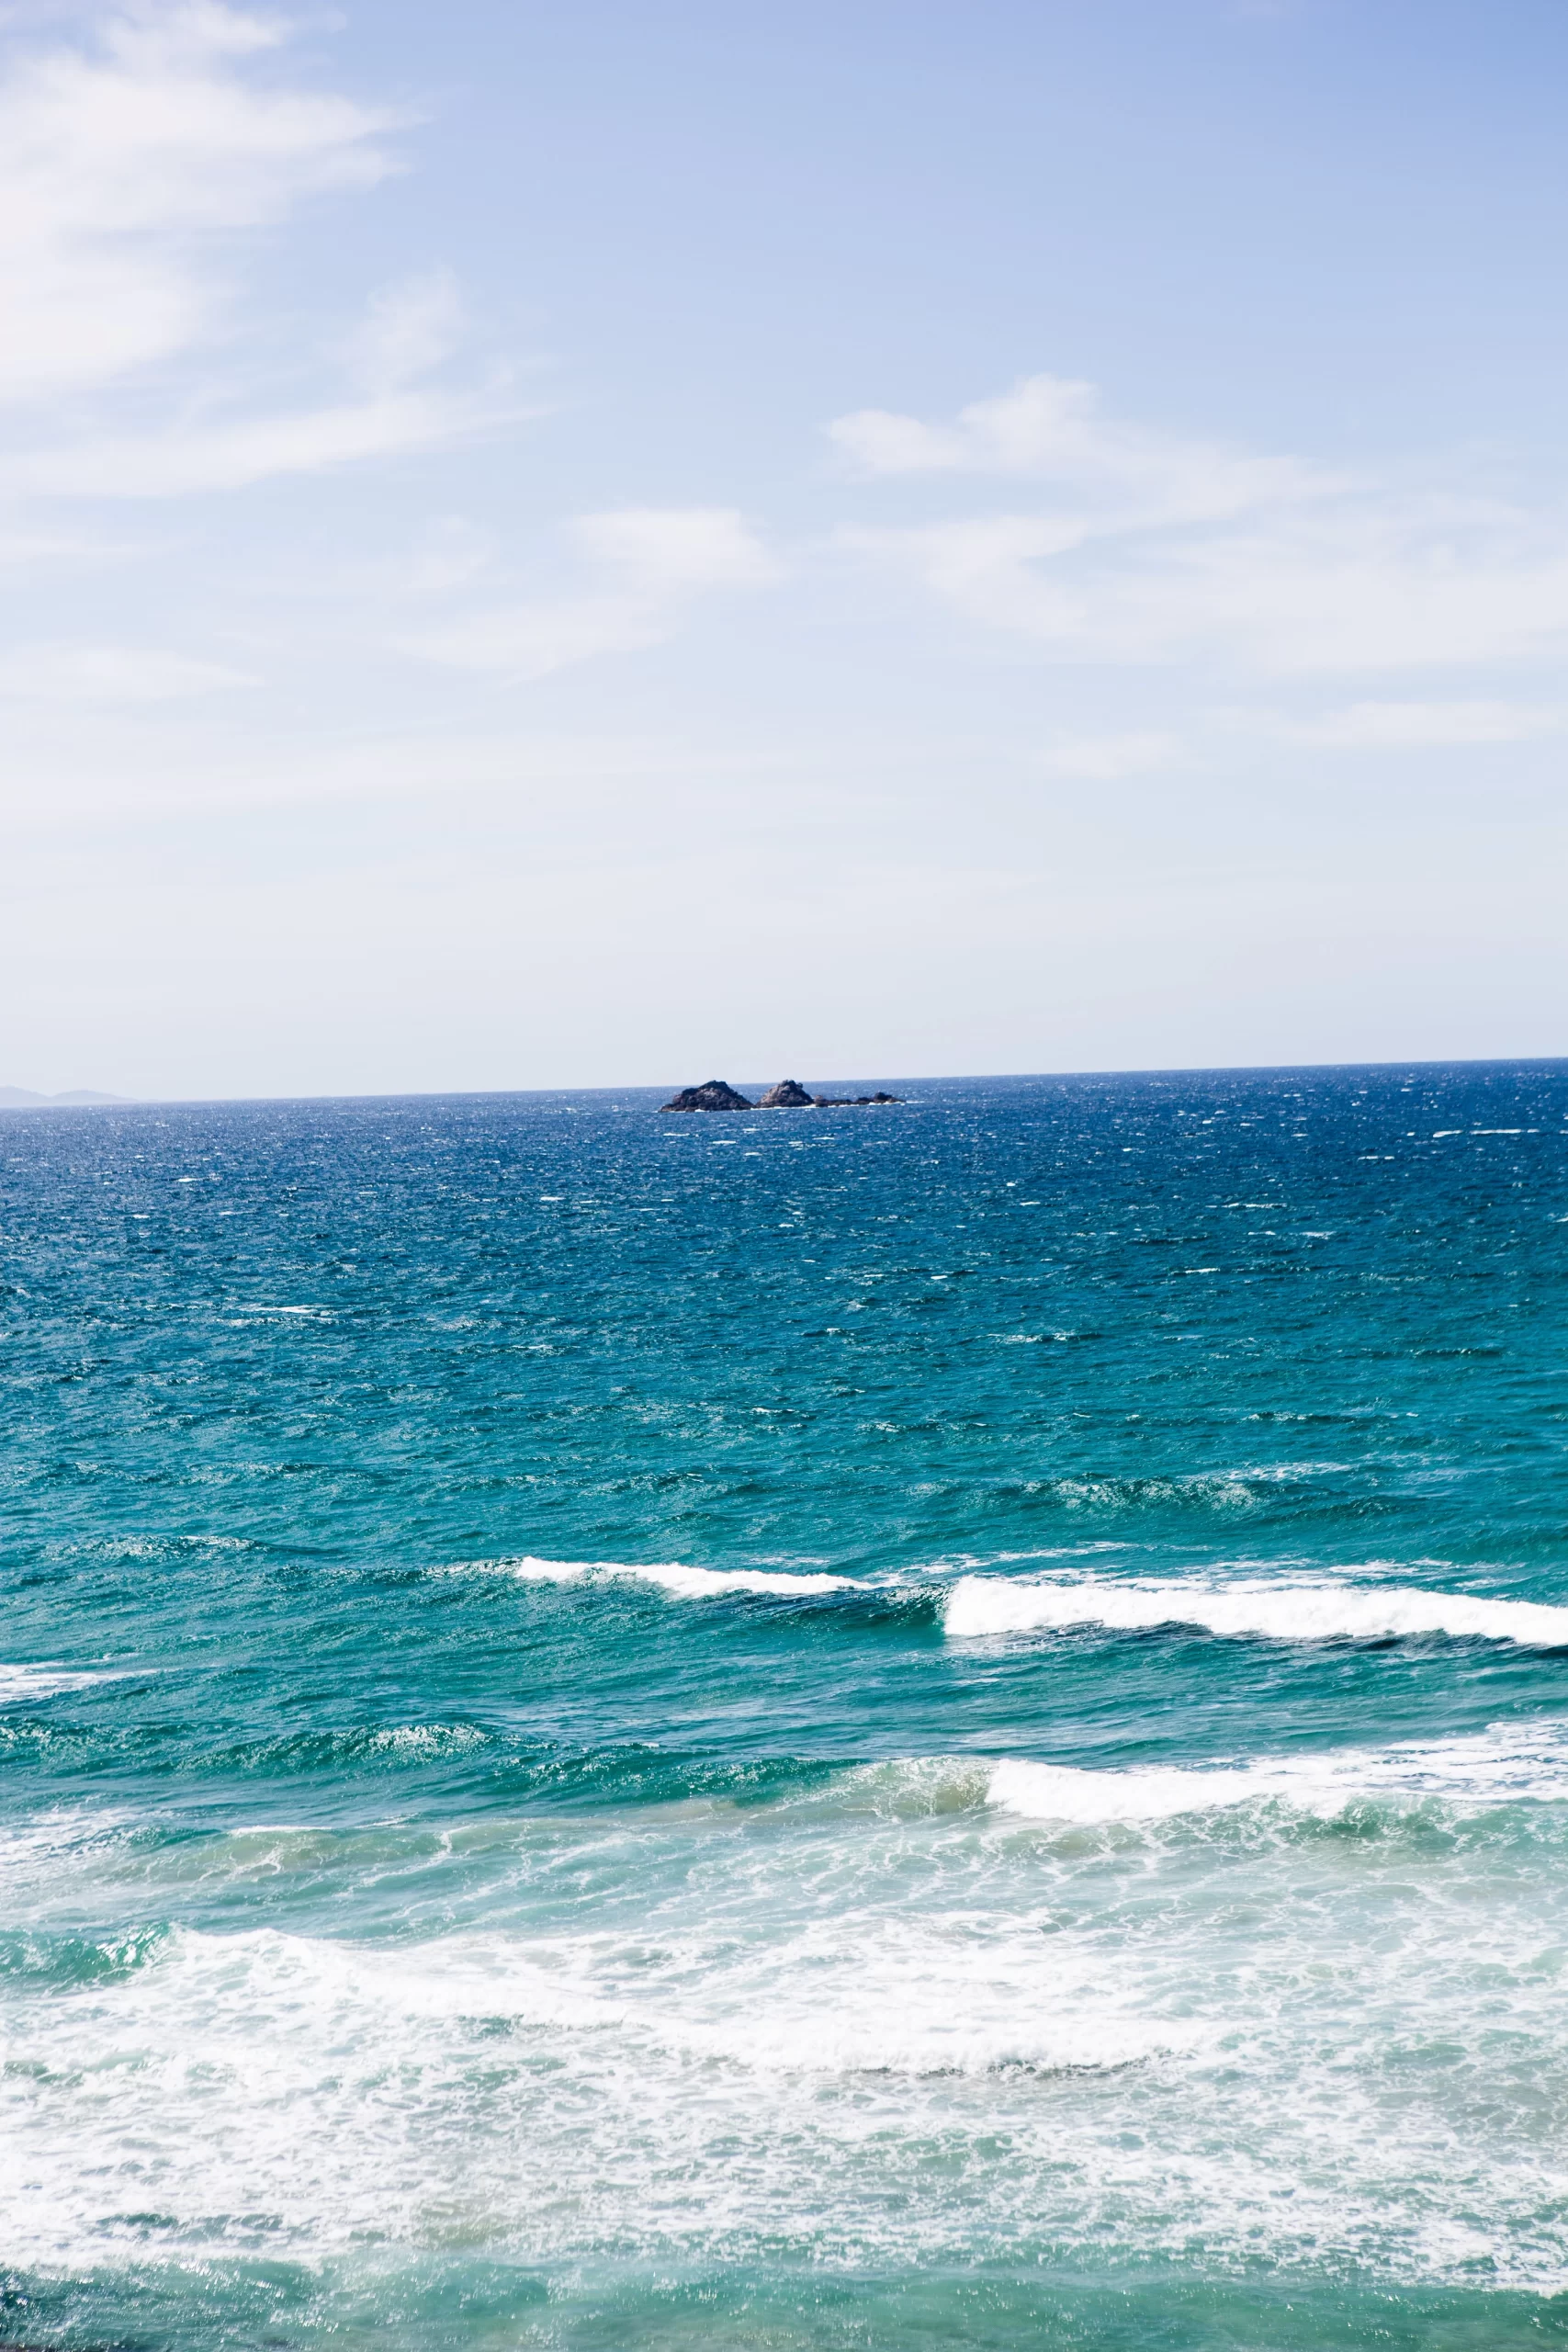 Byron Bay NSW, Australia Published on October 27, 2020 Canon, EOS 5D Mark III Free to use under the Unsplash License